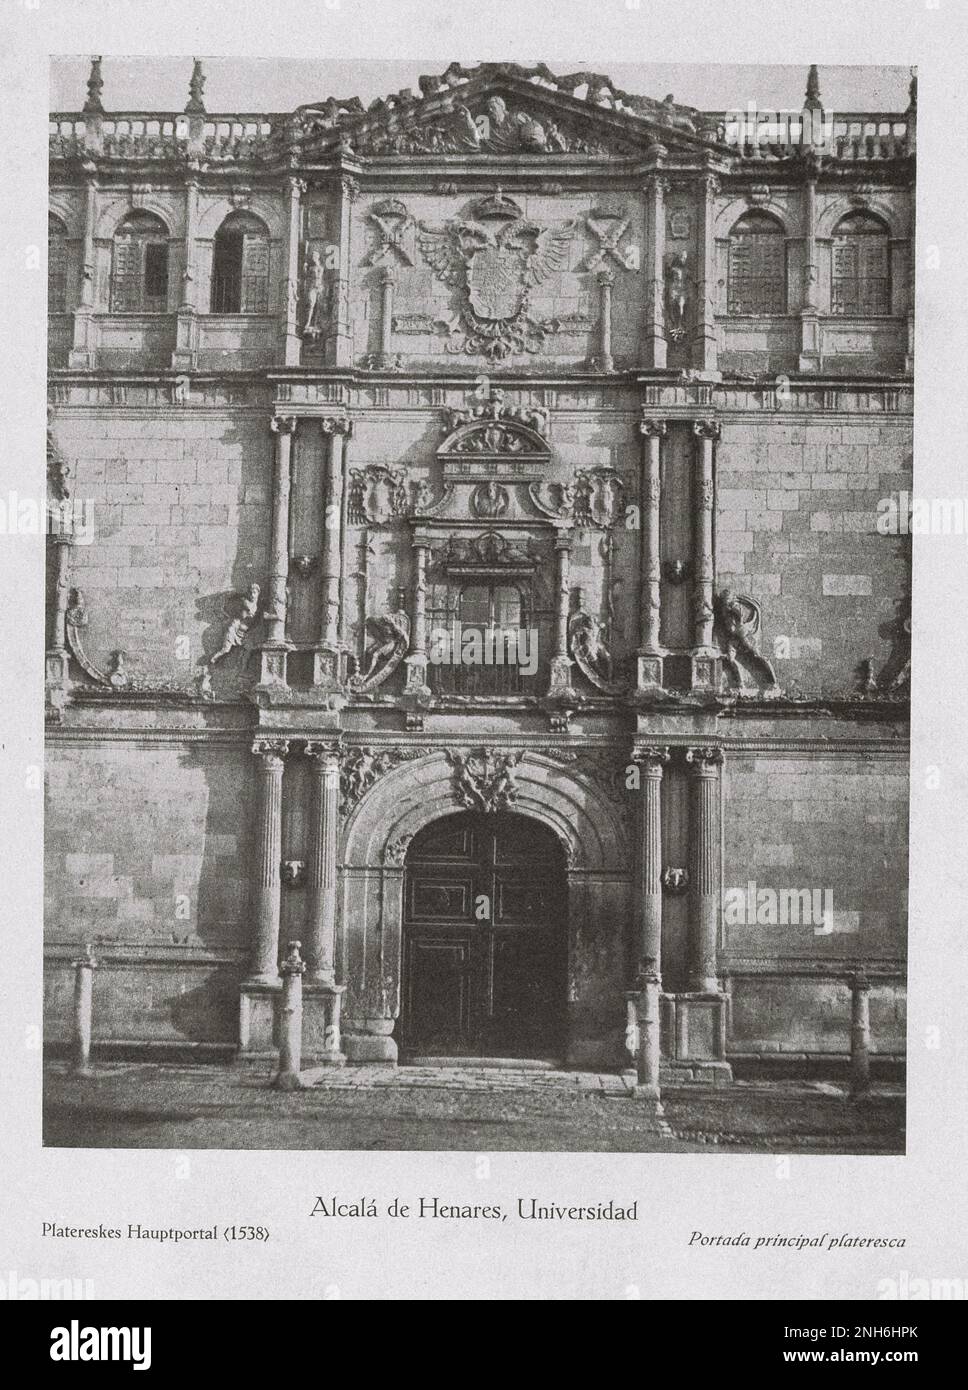 Architecture of Old Spain. University of Alcalá (Alcala de Henares Universidad). Alcalá de Henares, a city 35 km (22 miles) northeast of Madrid in Spain Plateresque main portal (1538) Stock Photo